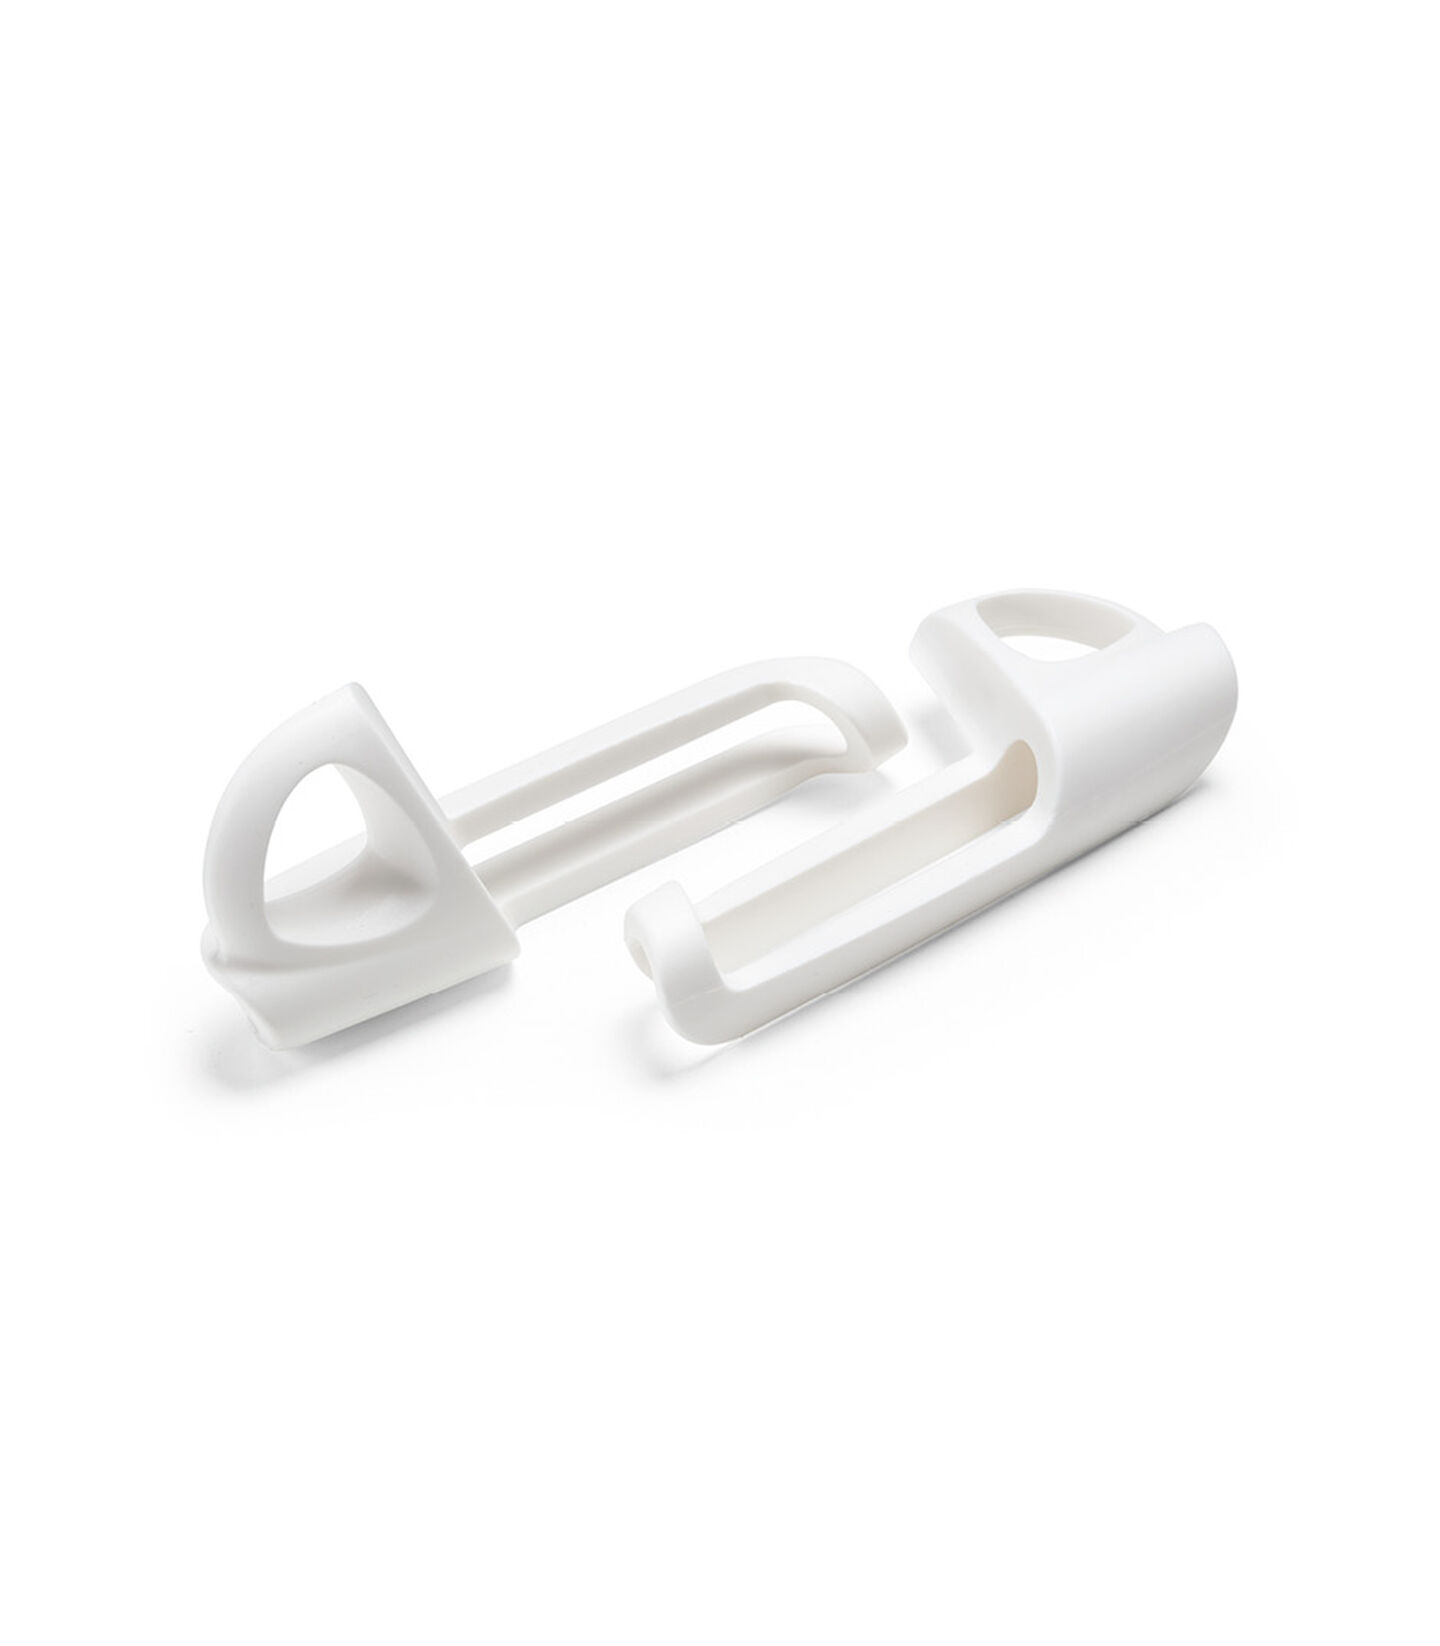 Stokke® Harness Attachment Brackets 2 pcs, , mainview view 1